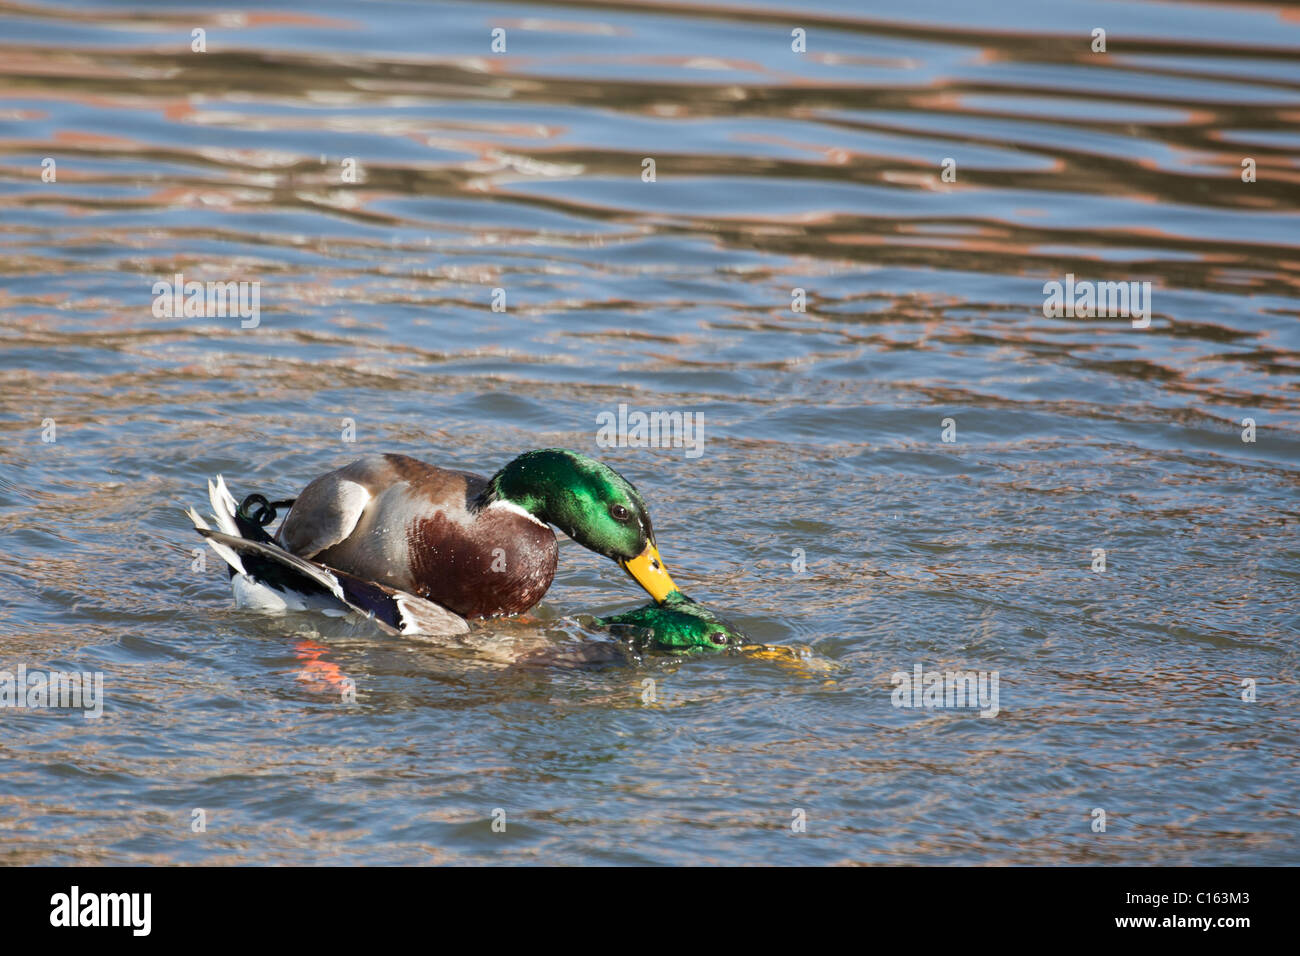 Two male Mallard ducks (Anas platyrhynchos) fighting over a female (not in image). One is trying to drown the other. Stock Photo